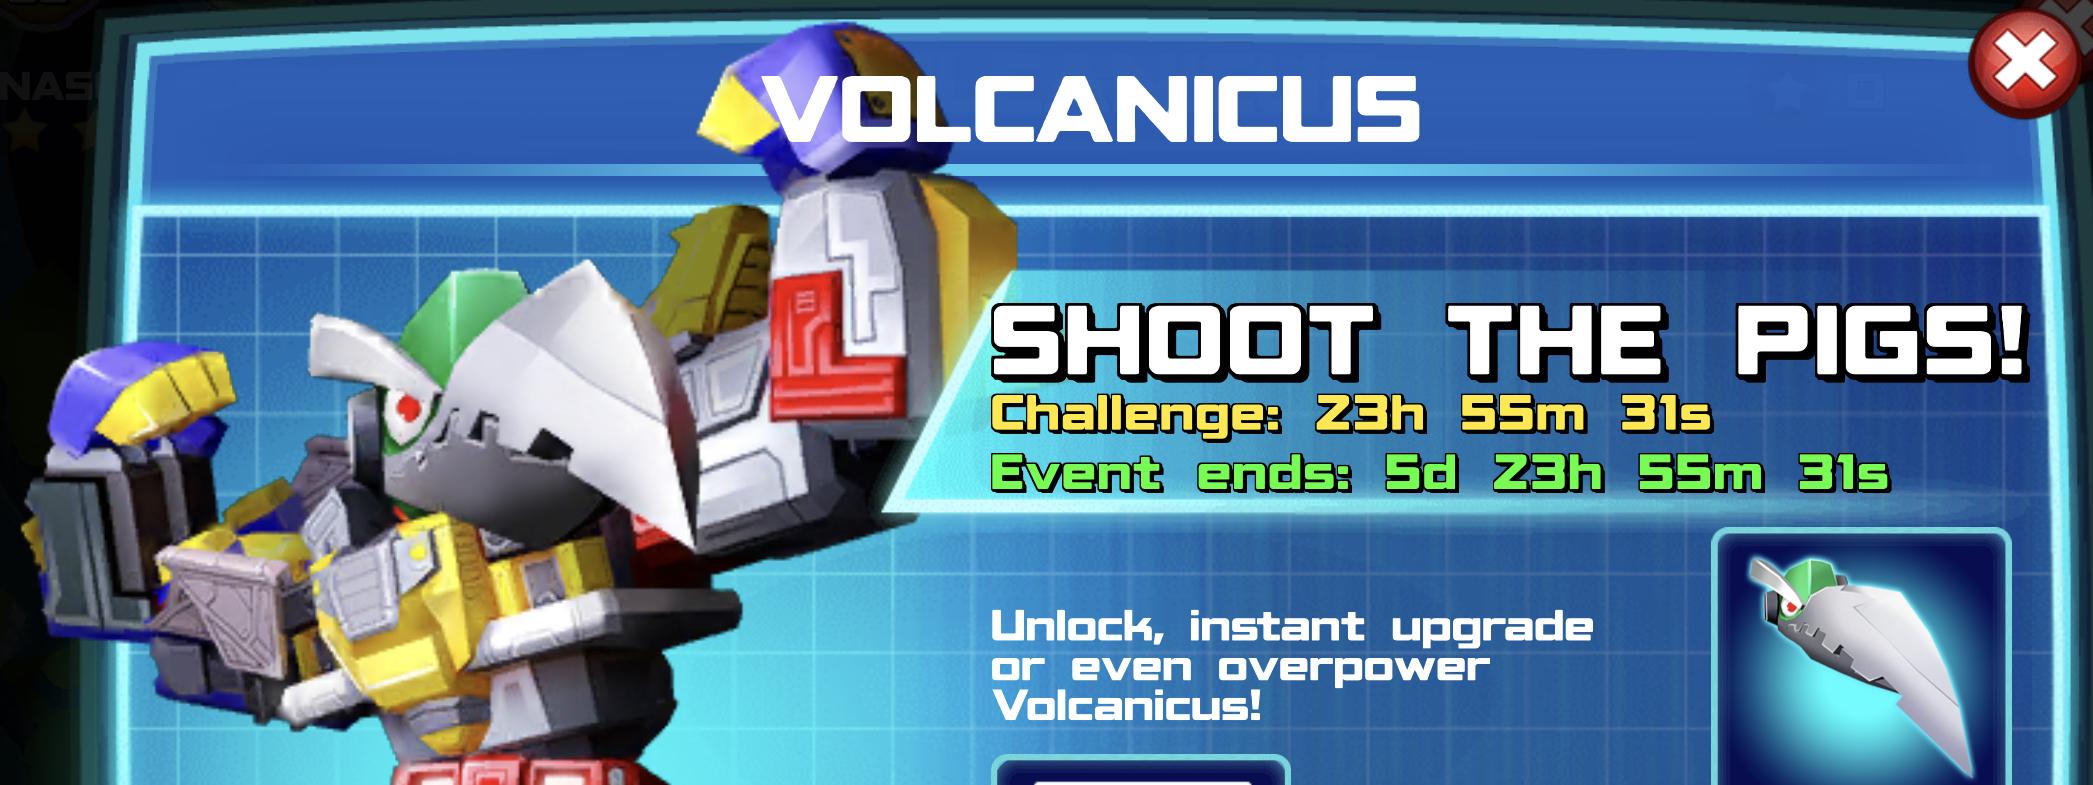 The event banner for Volcanicus